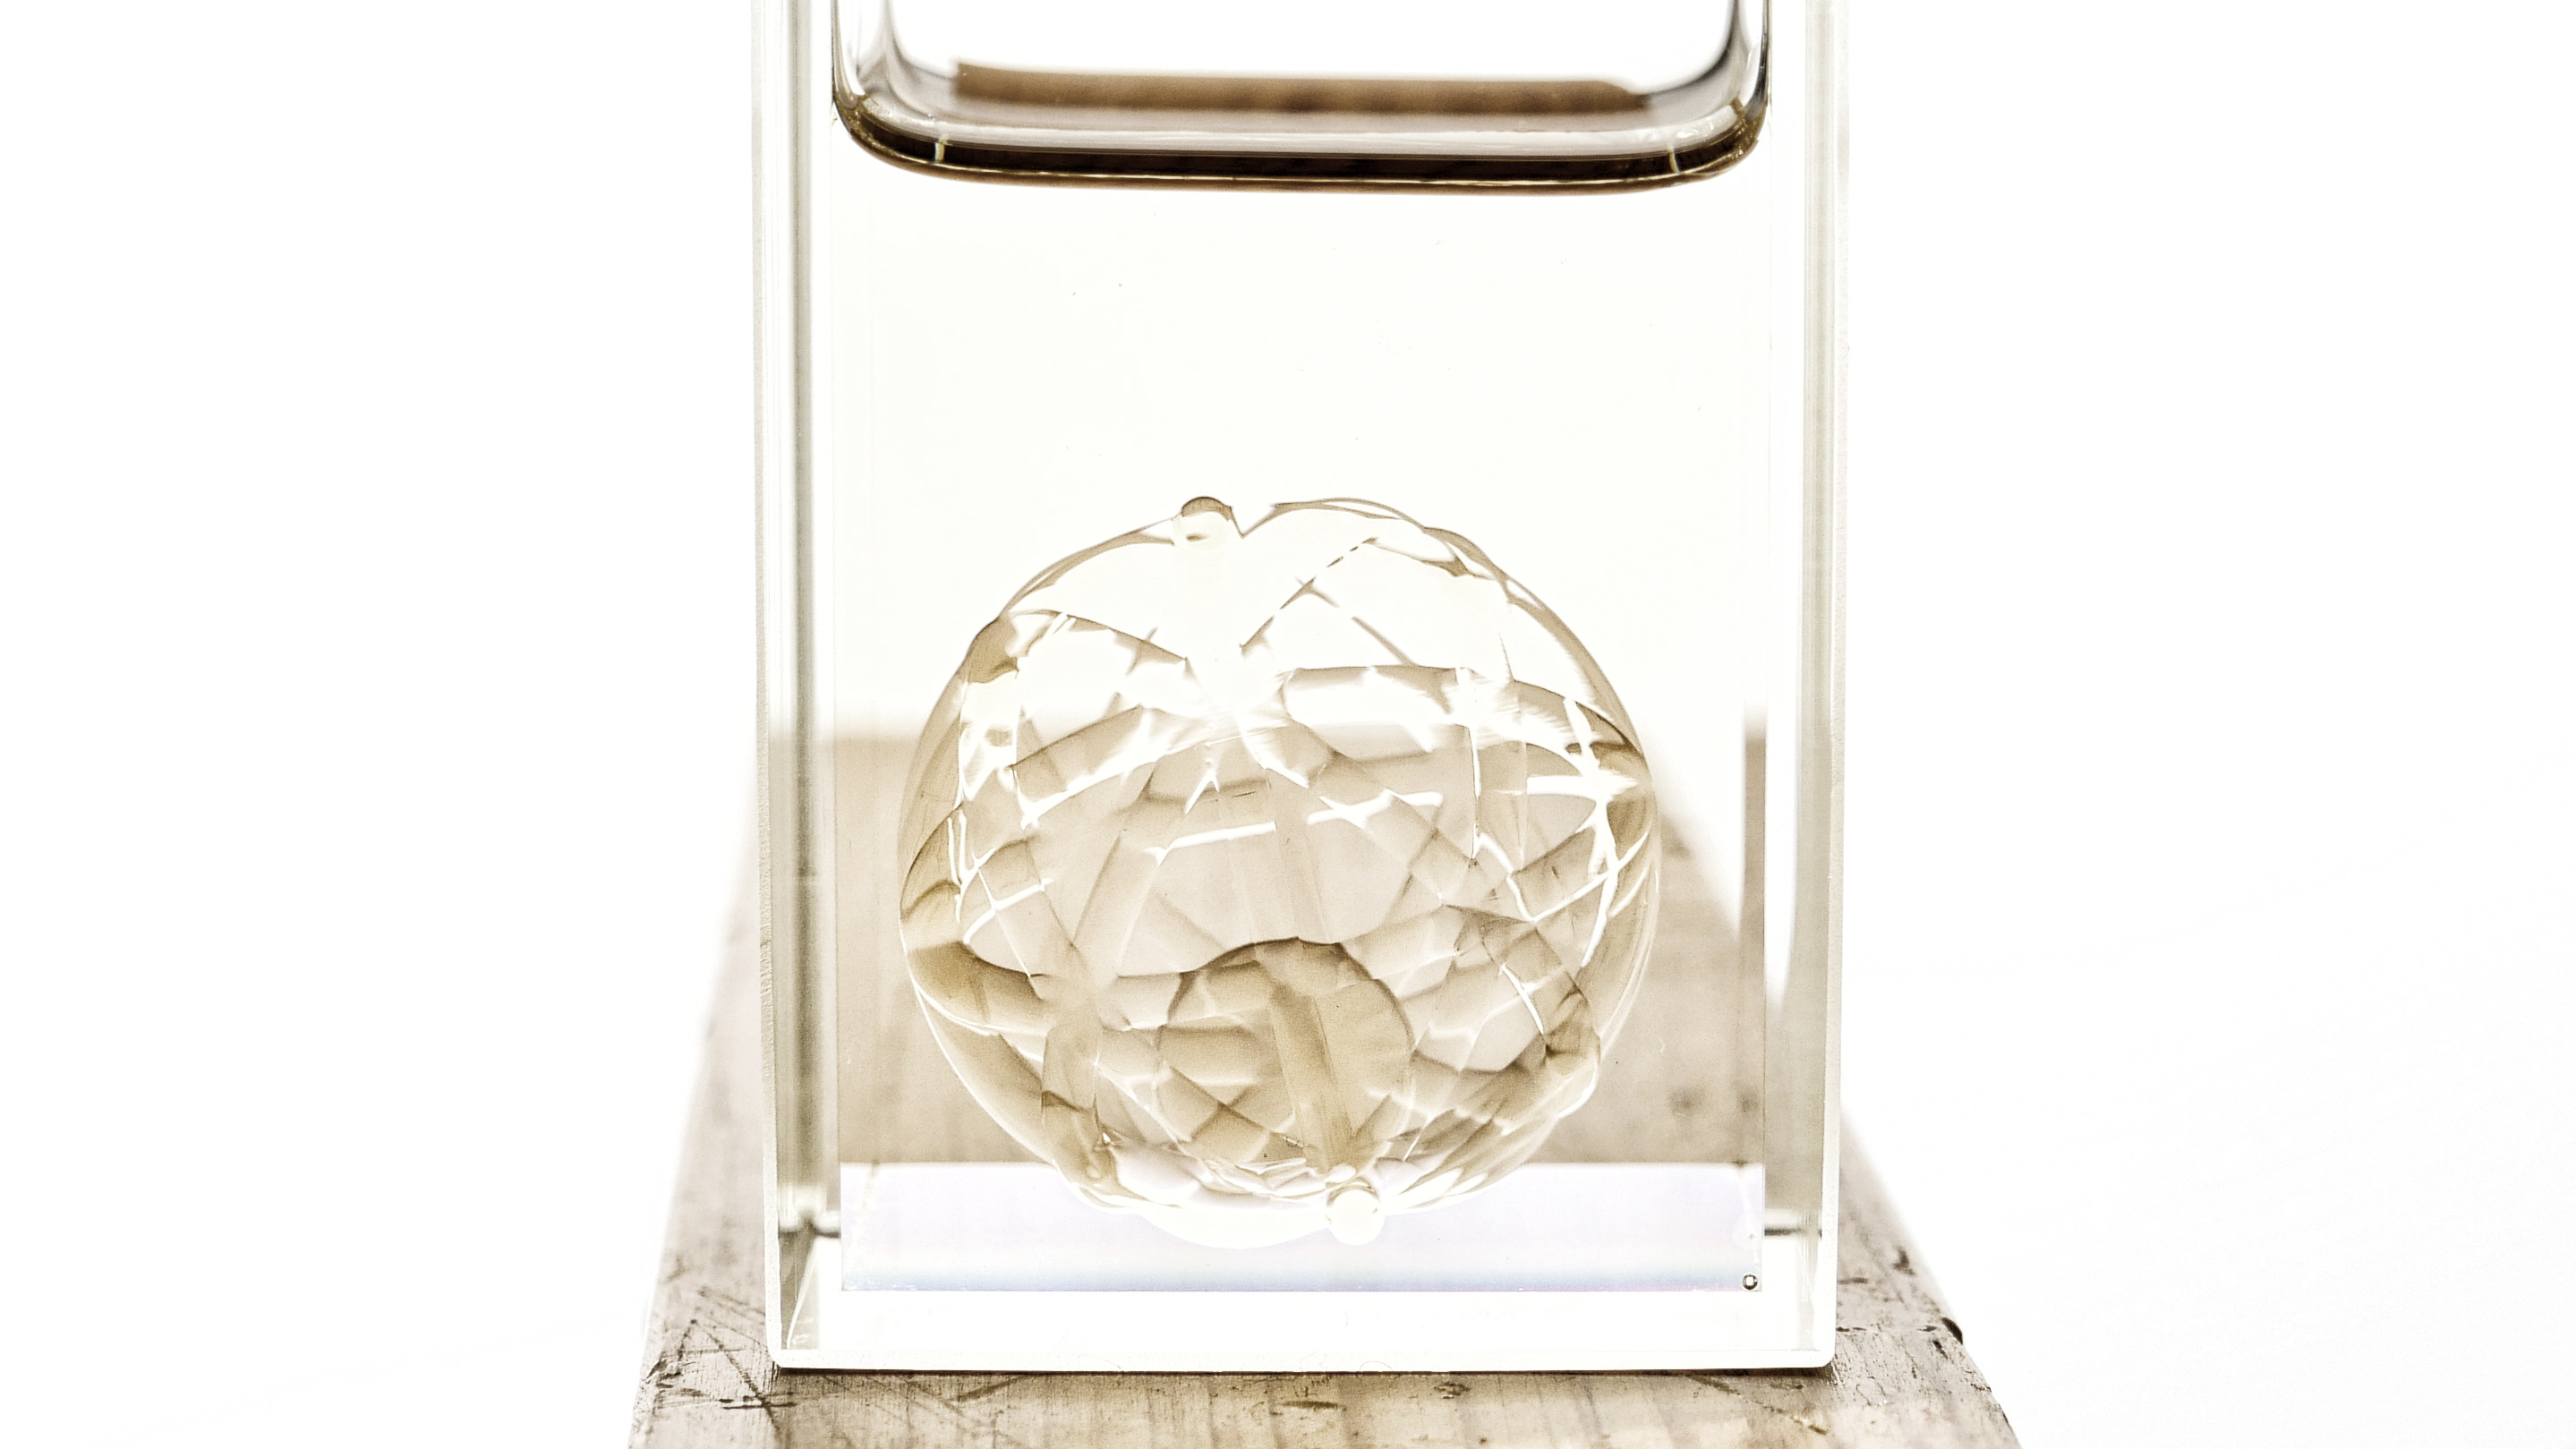 A ball in a cage 3D printed via xolography by the scientists. Image via Dirk Radzinski/xolo.